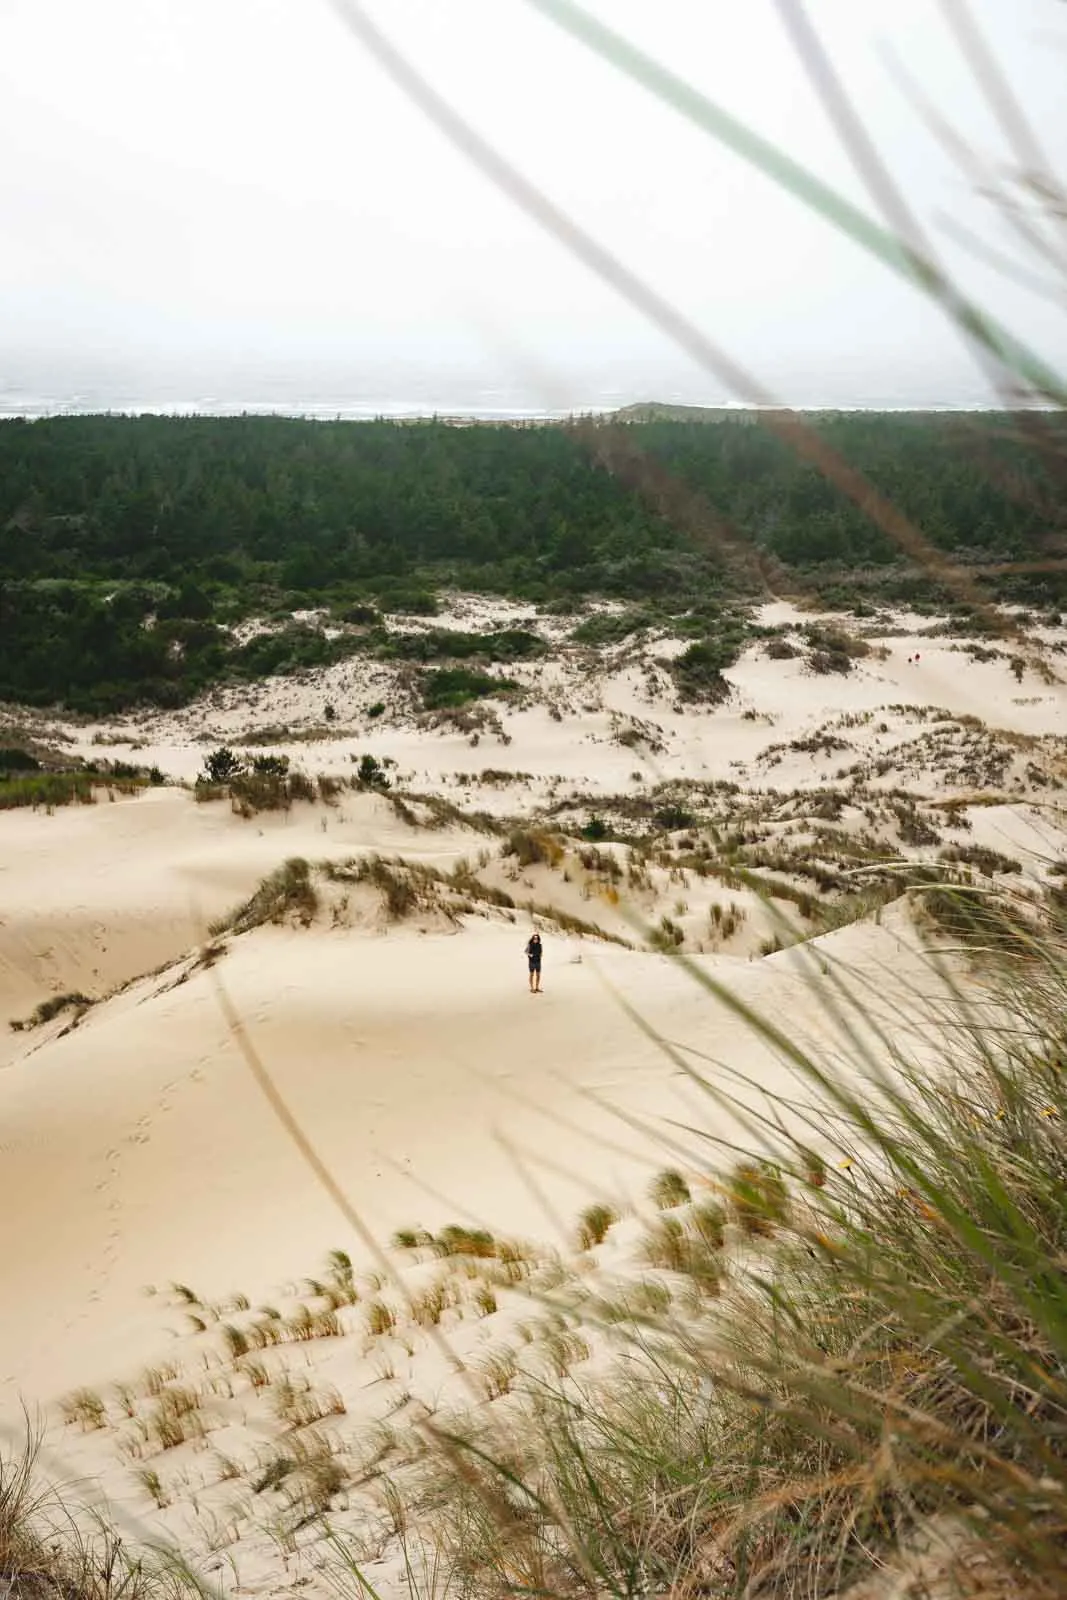 The Oregon Dunes NRA trail is a fun hike when visiting the Oregon sand dunes.